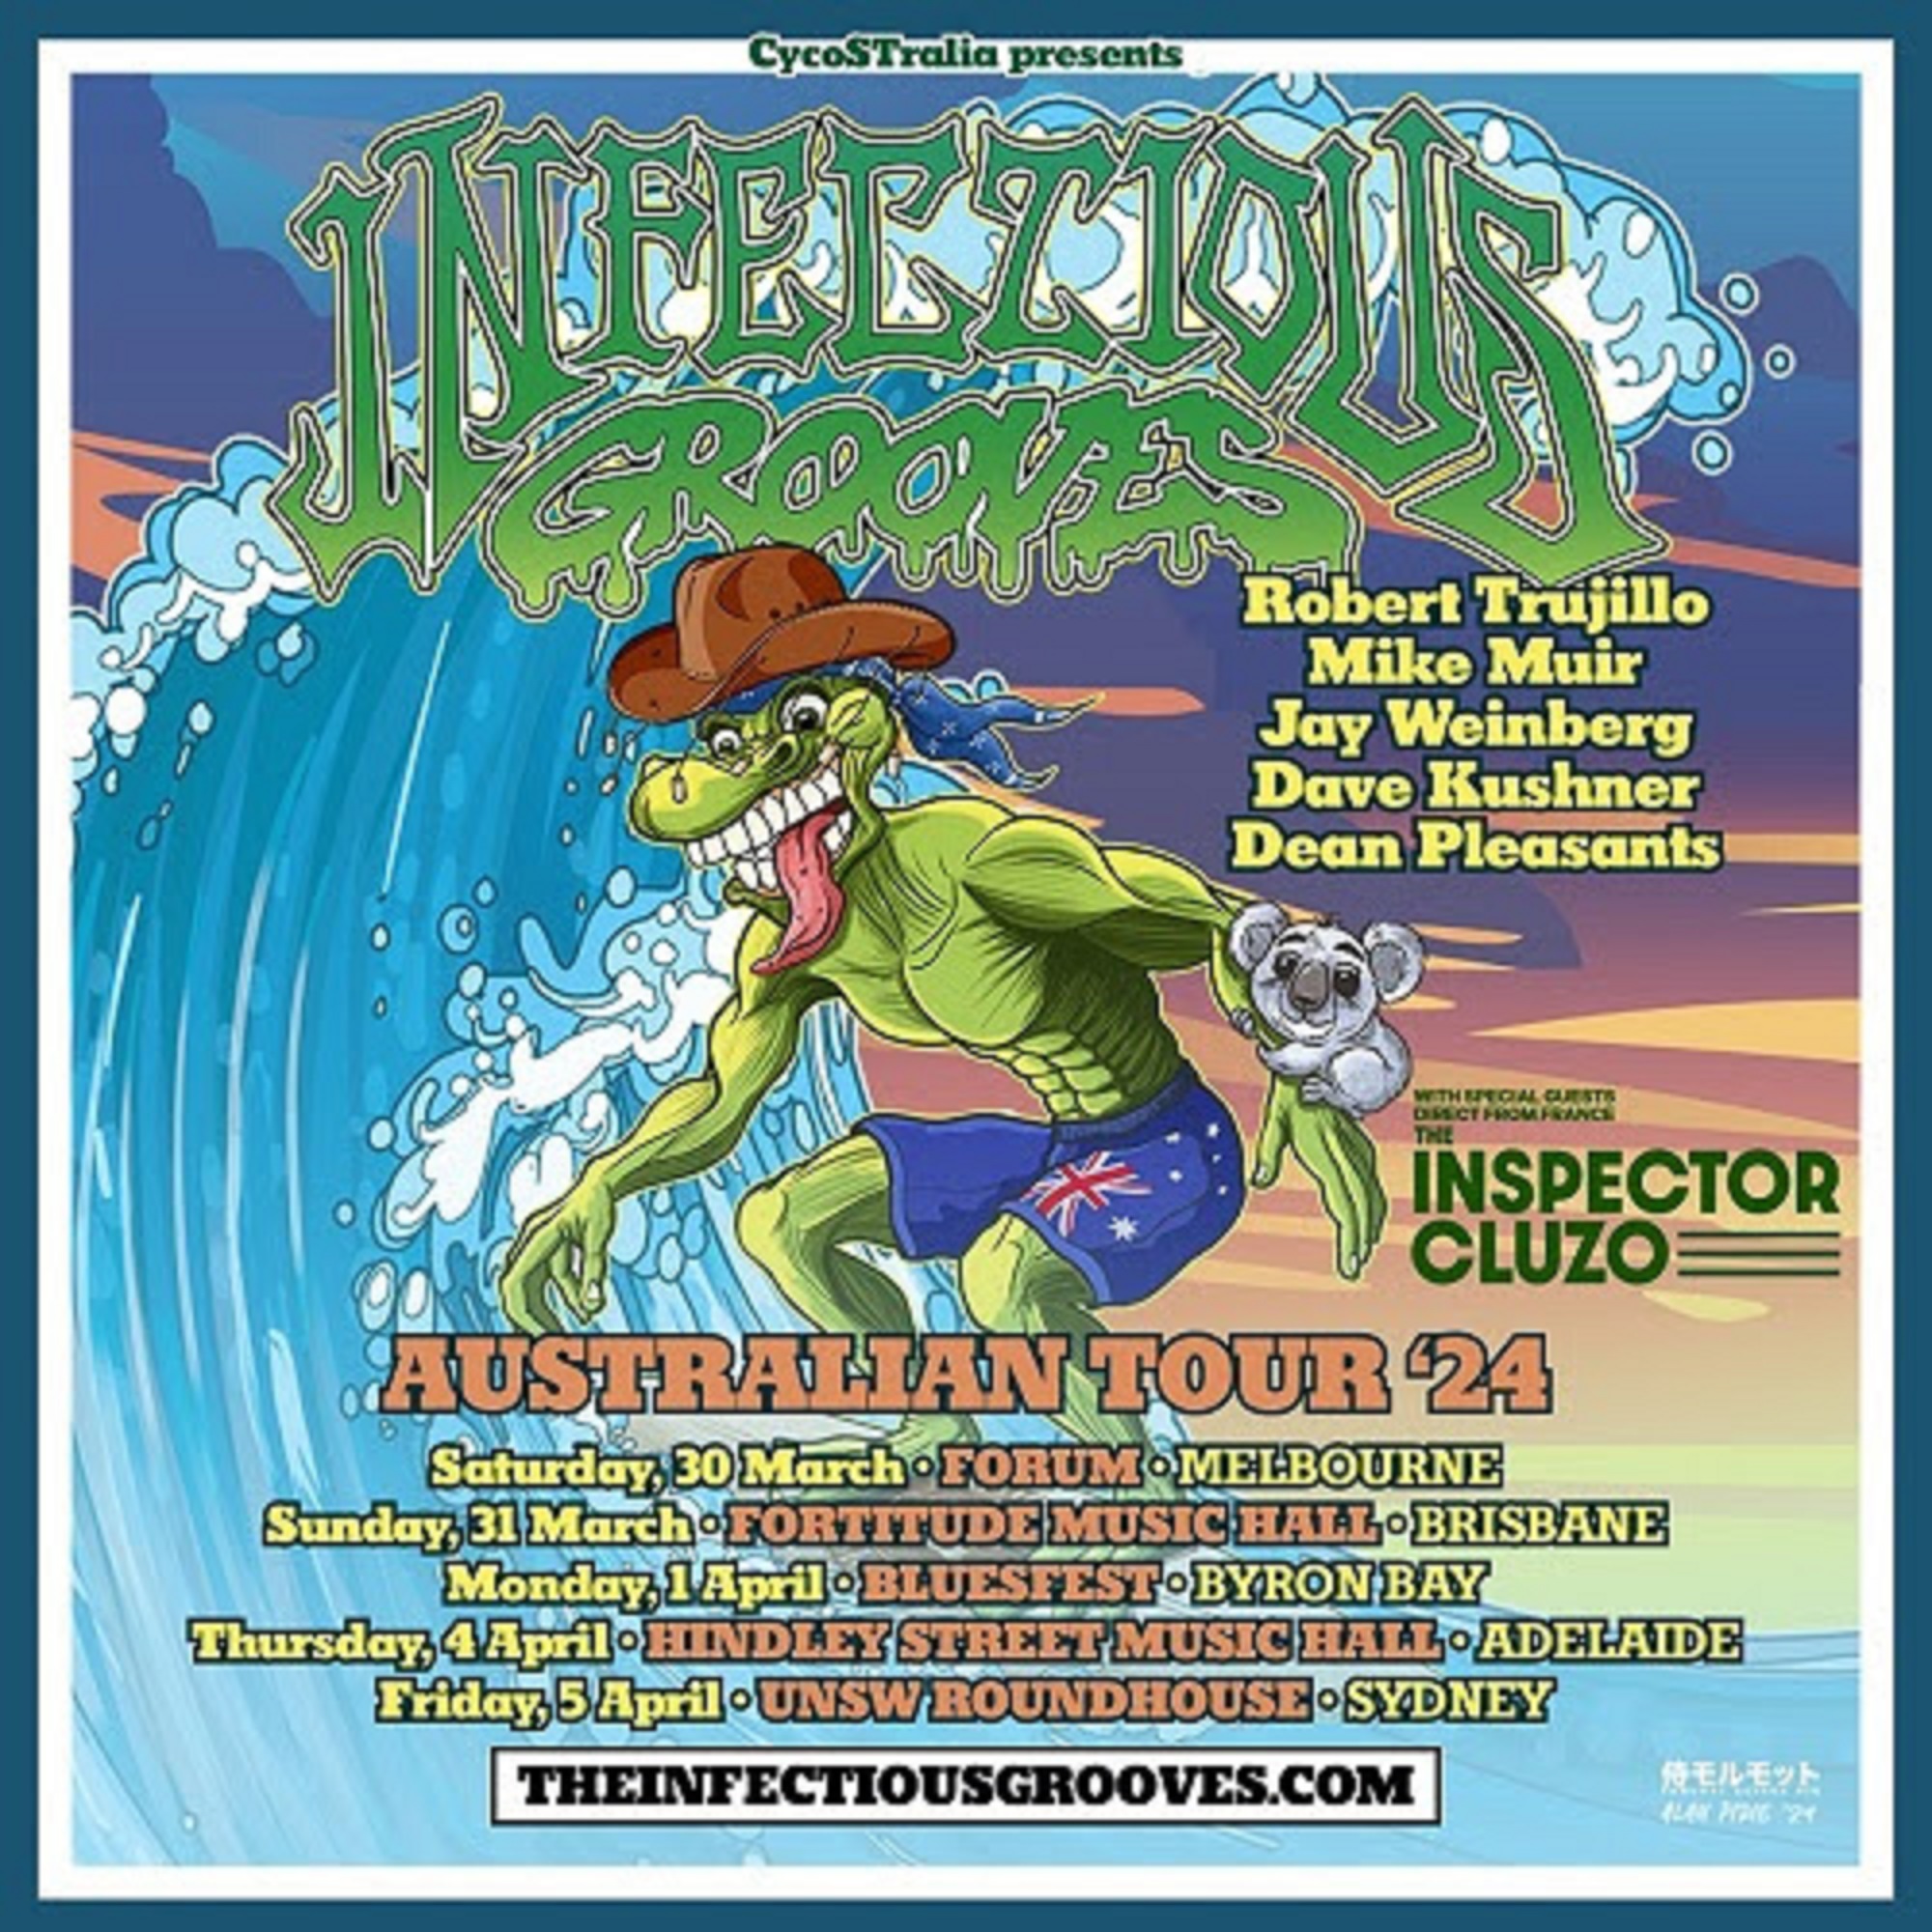 Robert Trujillo and Infectious Grooves Handpick Inspector Cluzo for Australian Tour